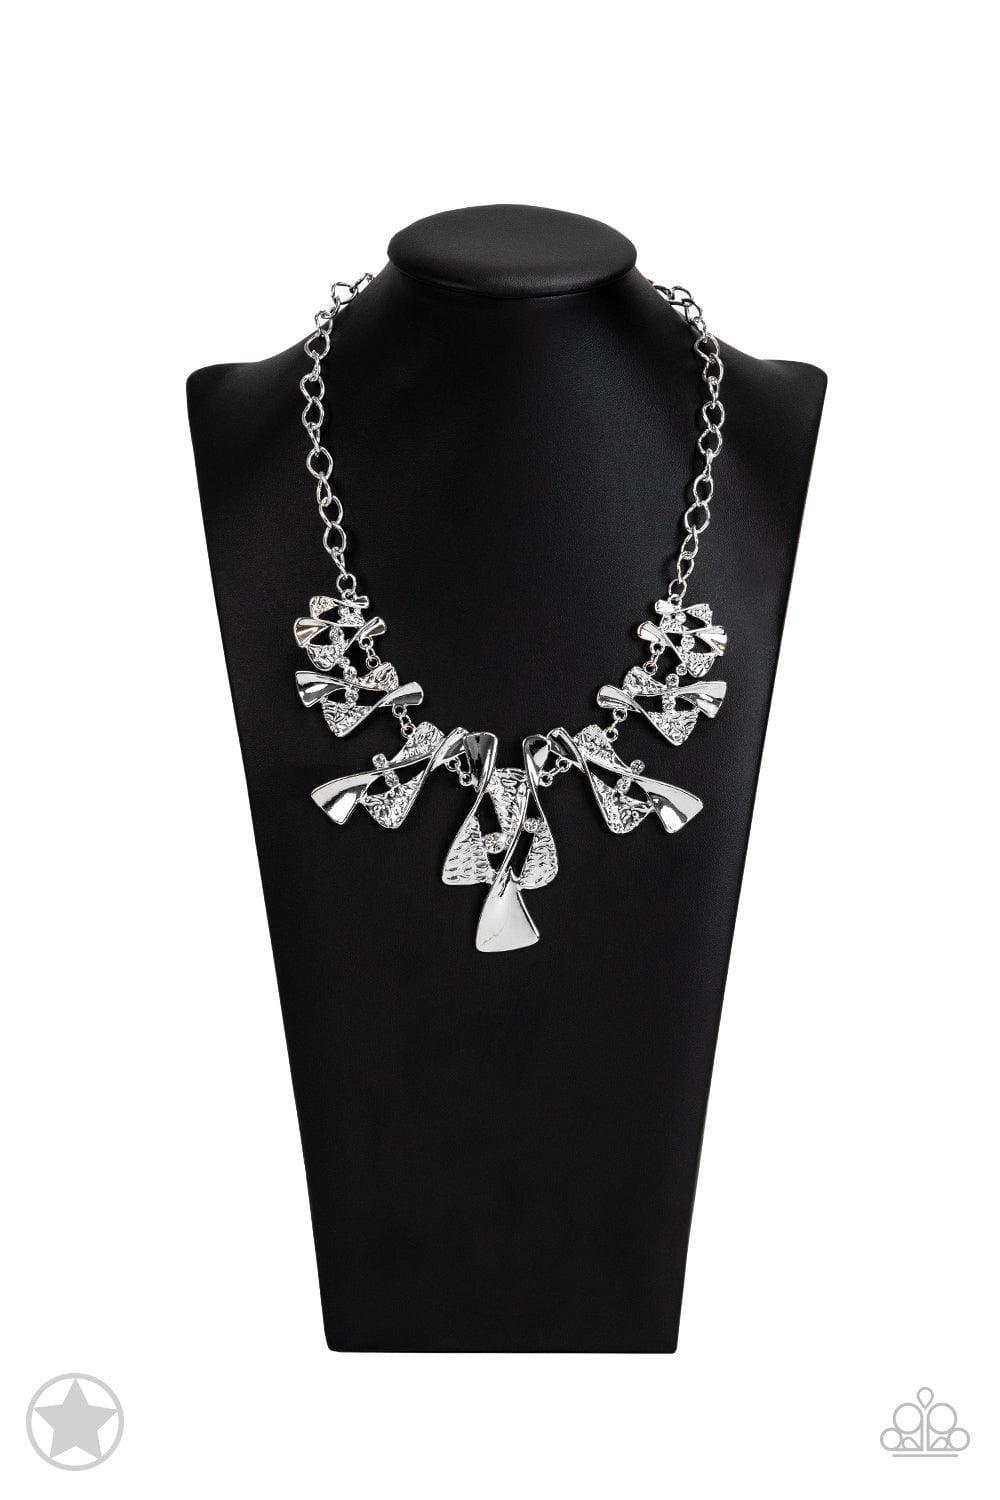 Paparazzi Accessories - Paparazzi Blockbuster Necklace: Sands Of Time Silver - Bling by JessieK